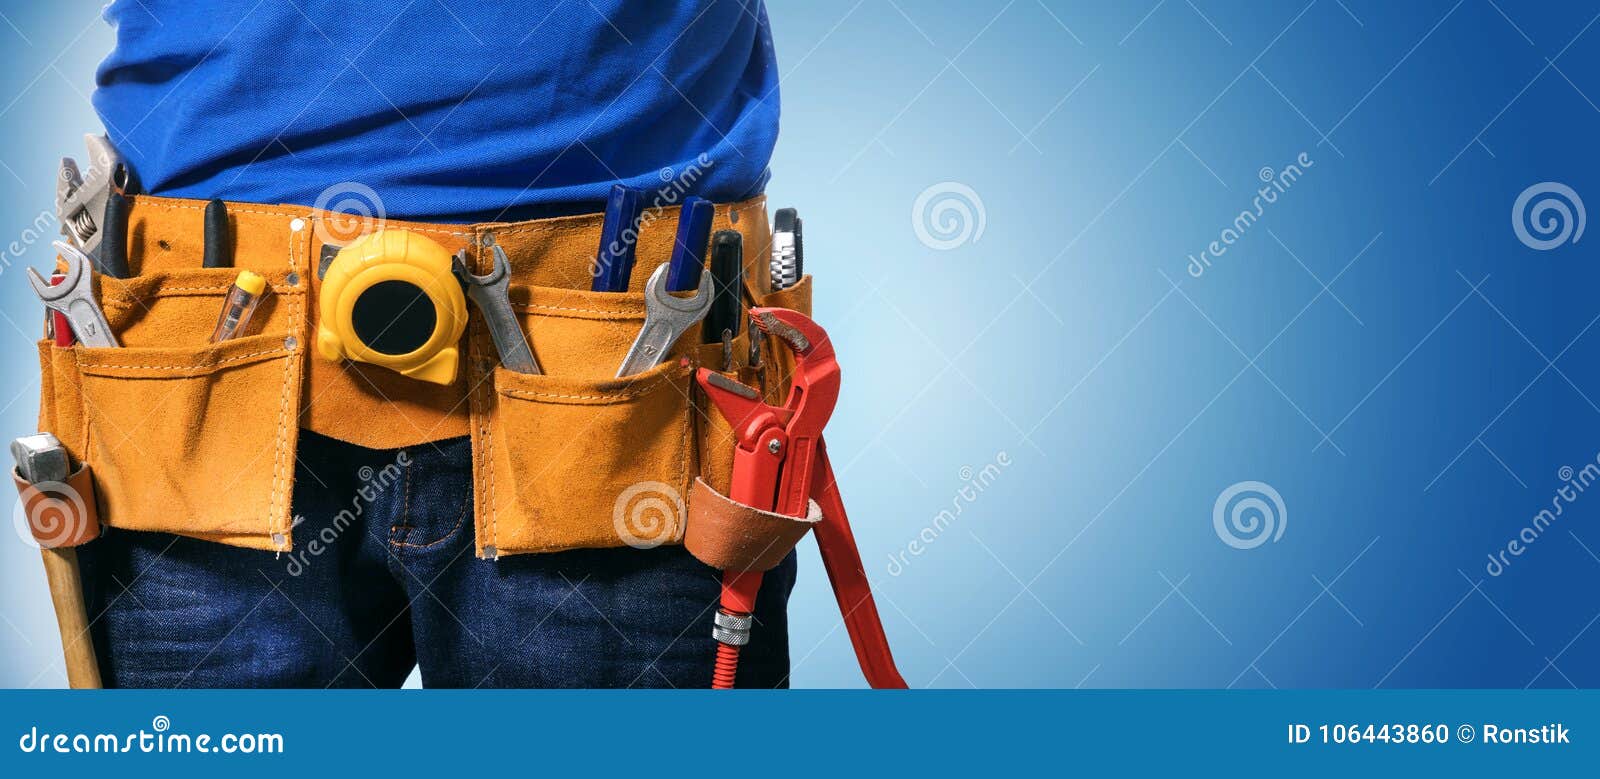 handyman tool belt on blue background with copy space